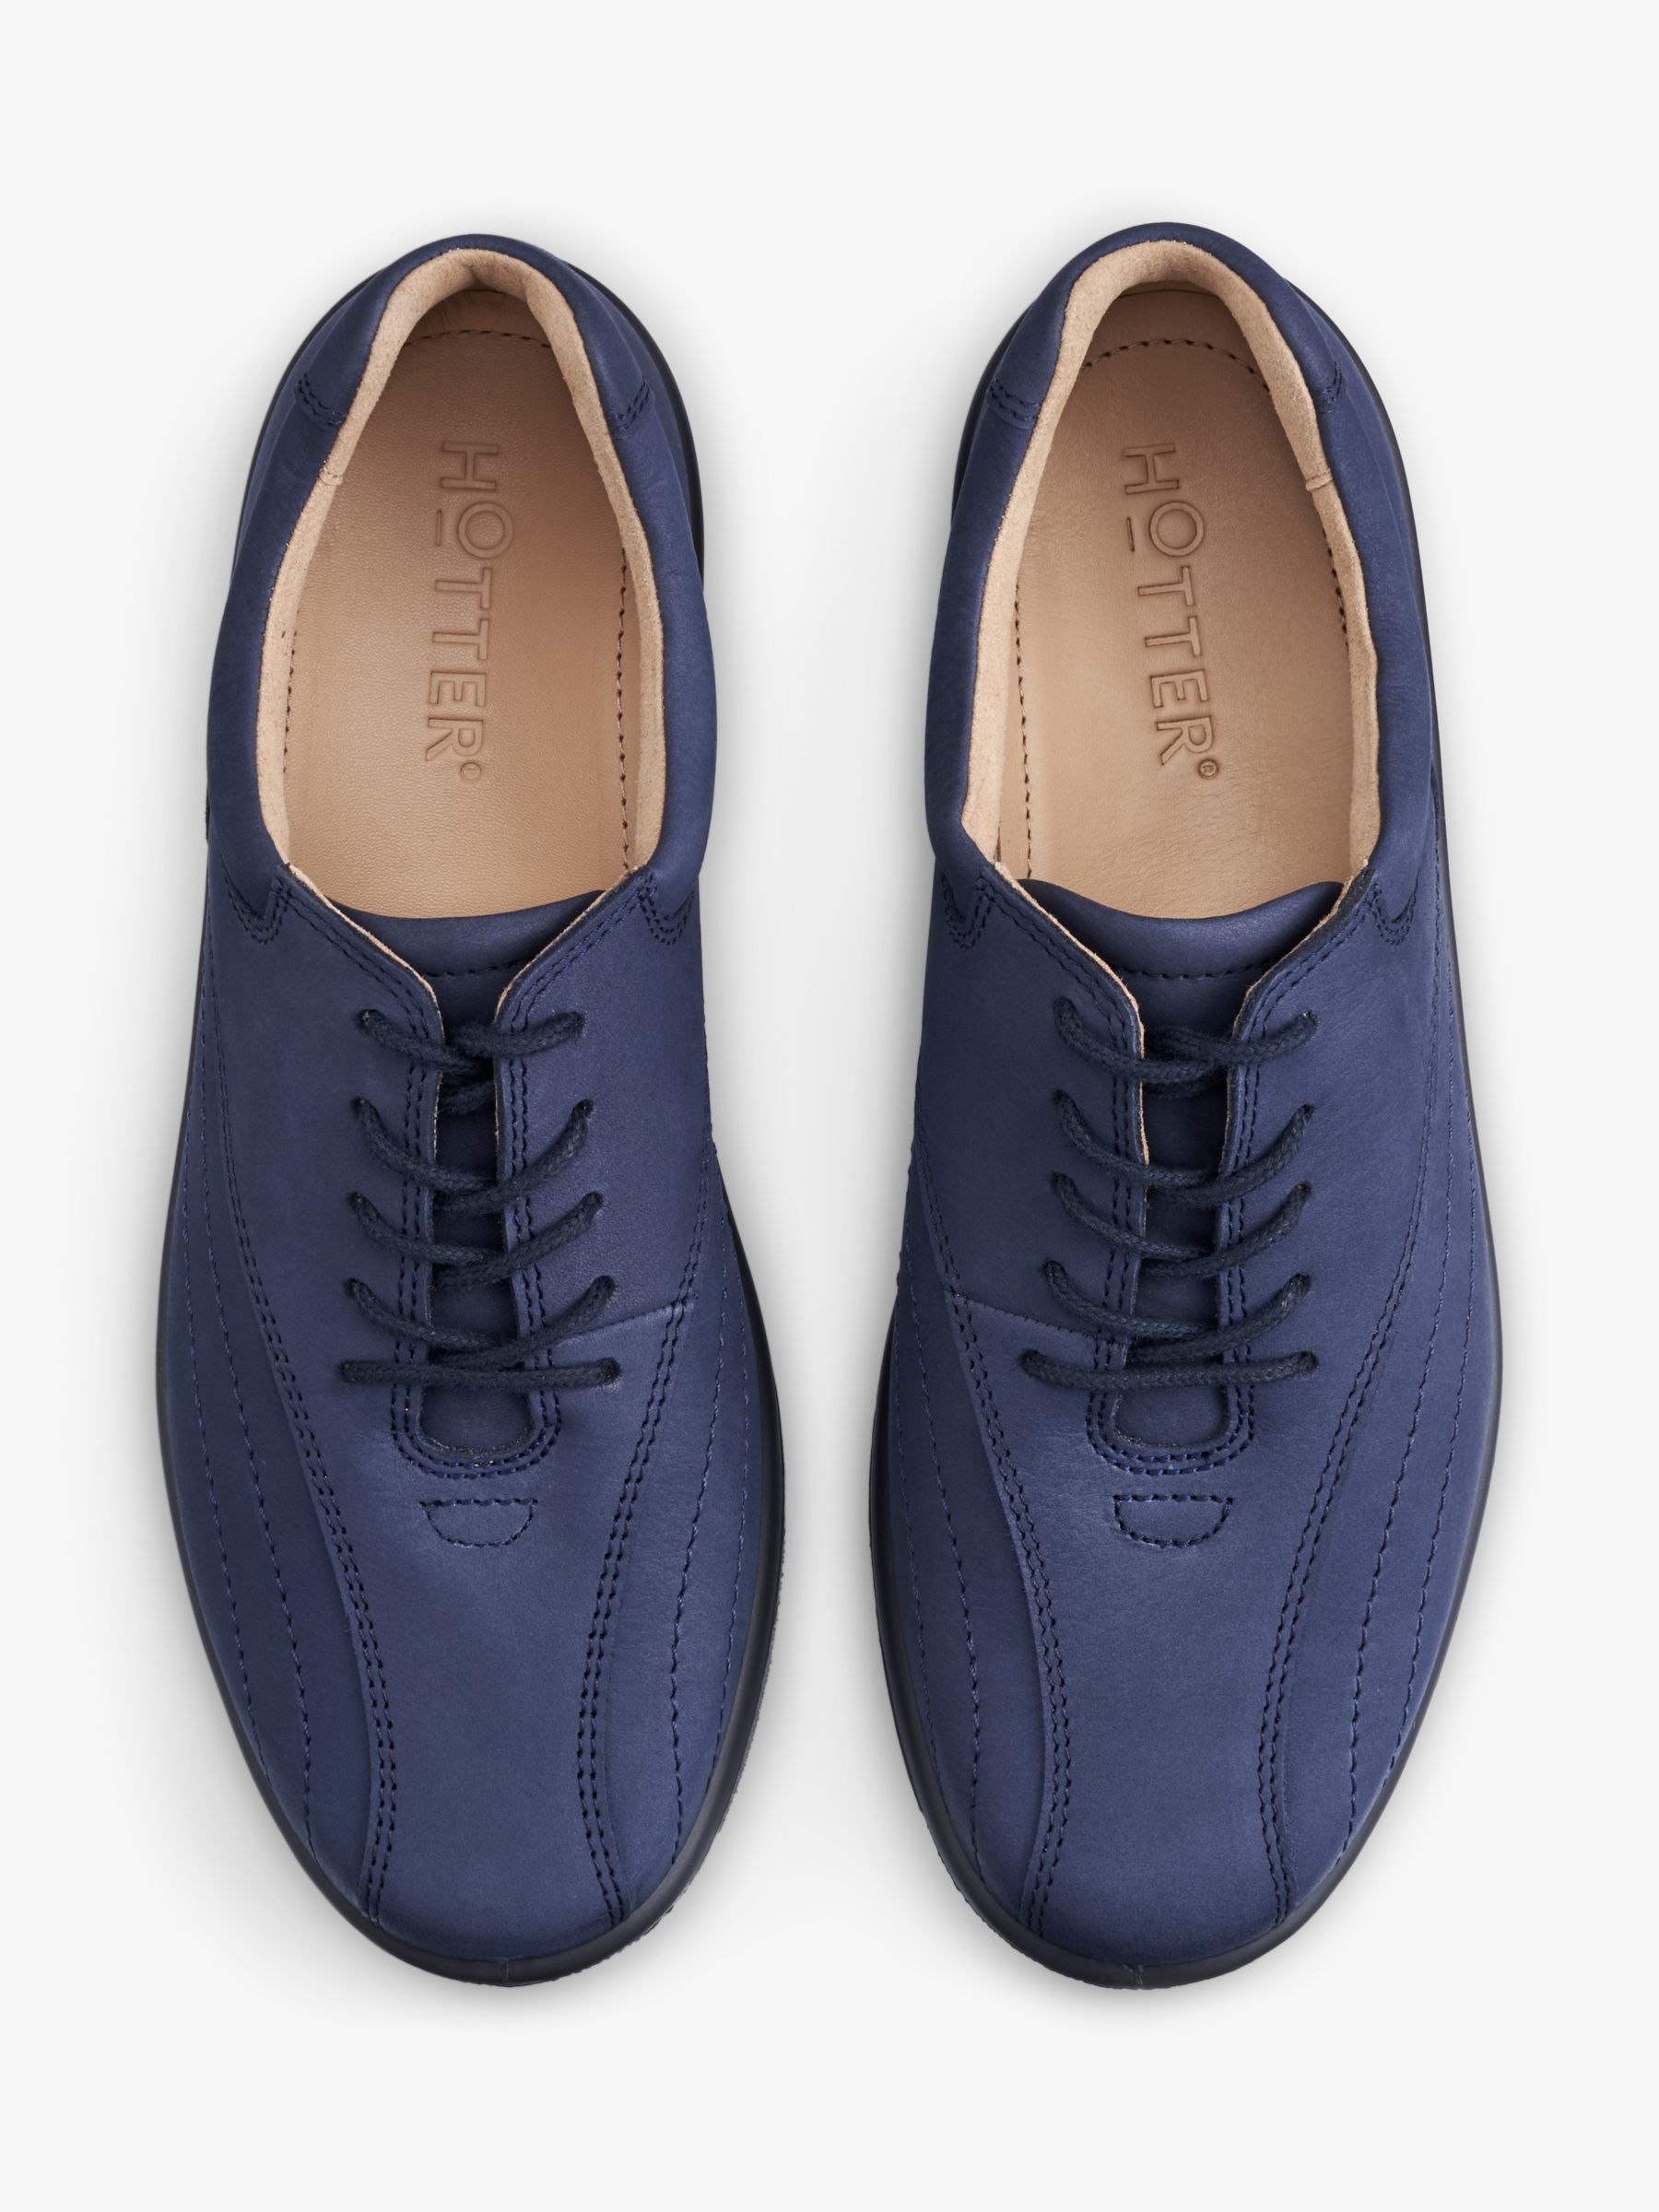 Buy Hotter Tone II Classic Nubuck Bowling Style Shoes, Denim Navy Online at johnlewis.com